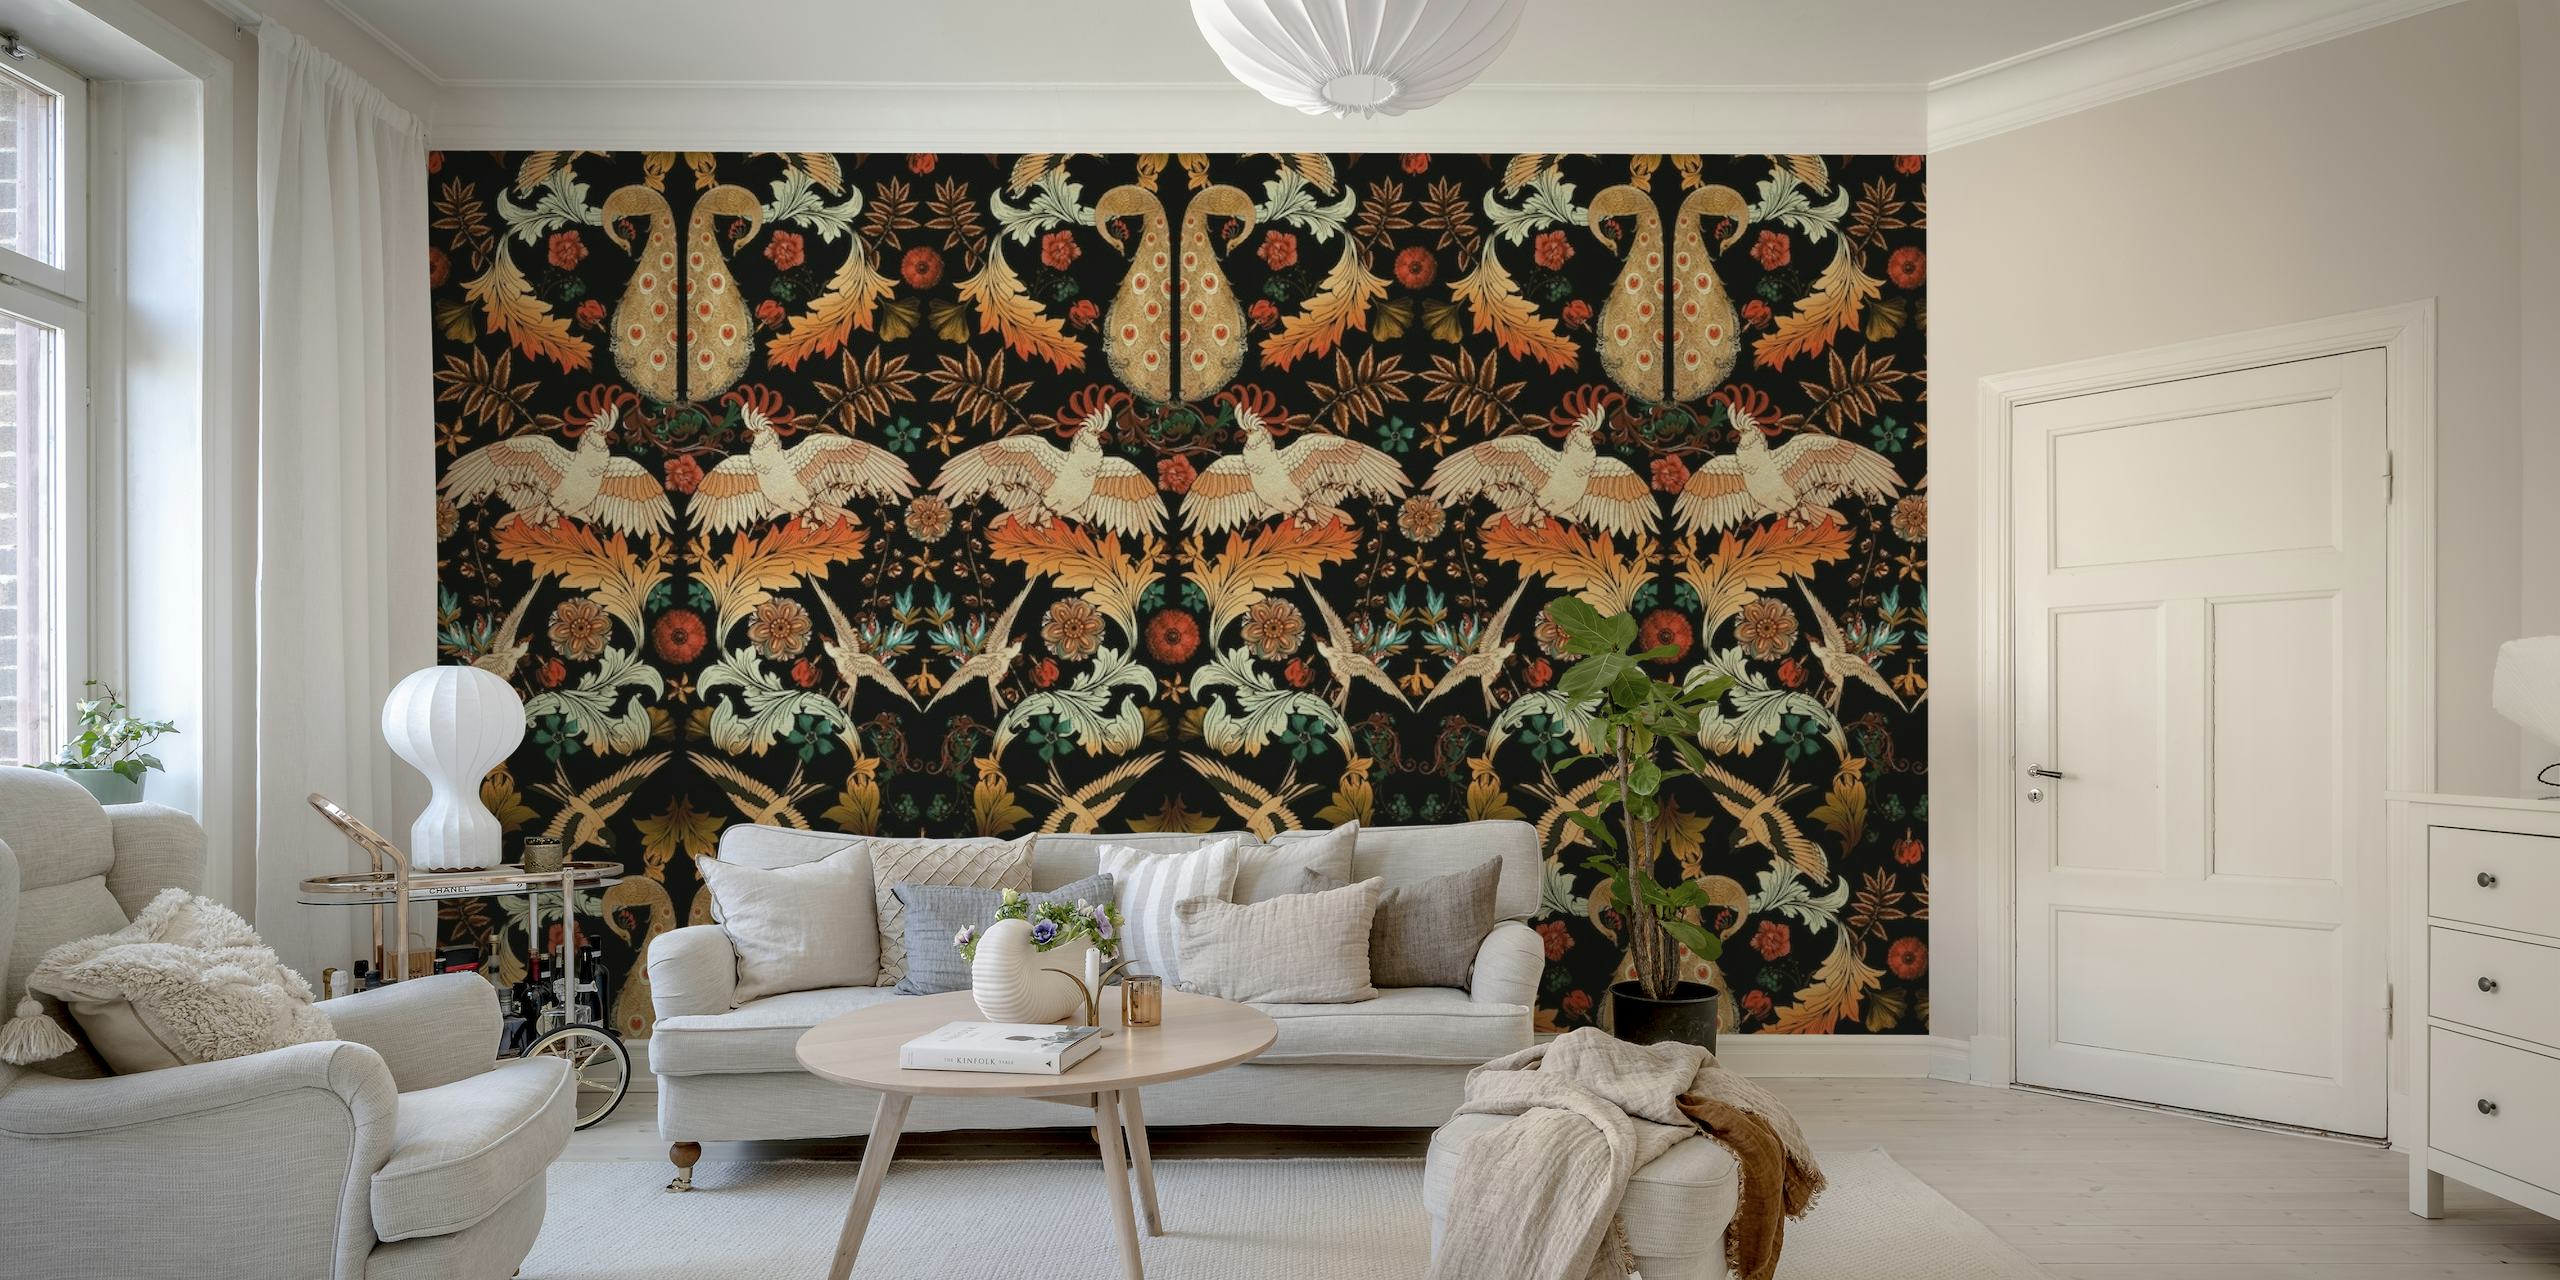 Victorian-style floral pattern wall mural in dark, rich colors.